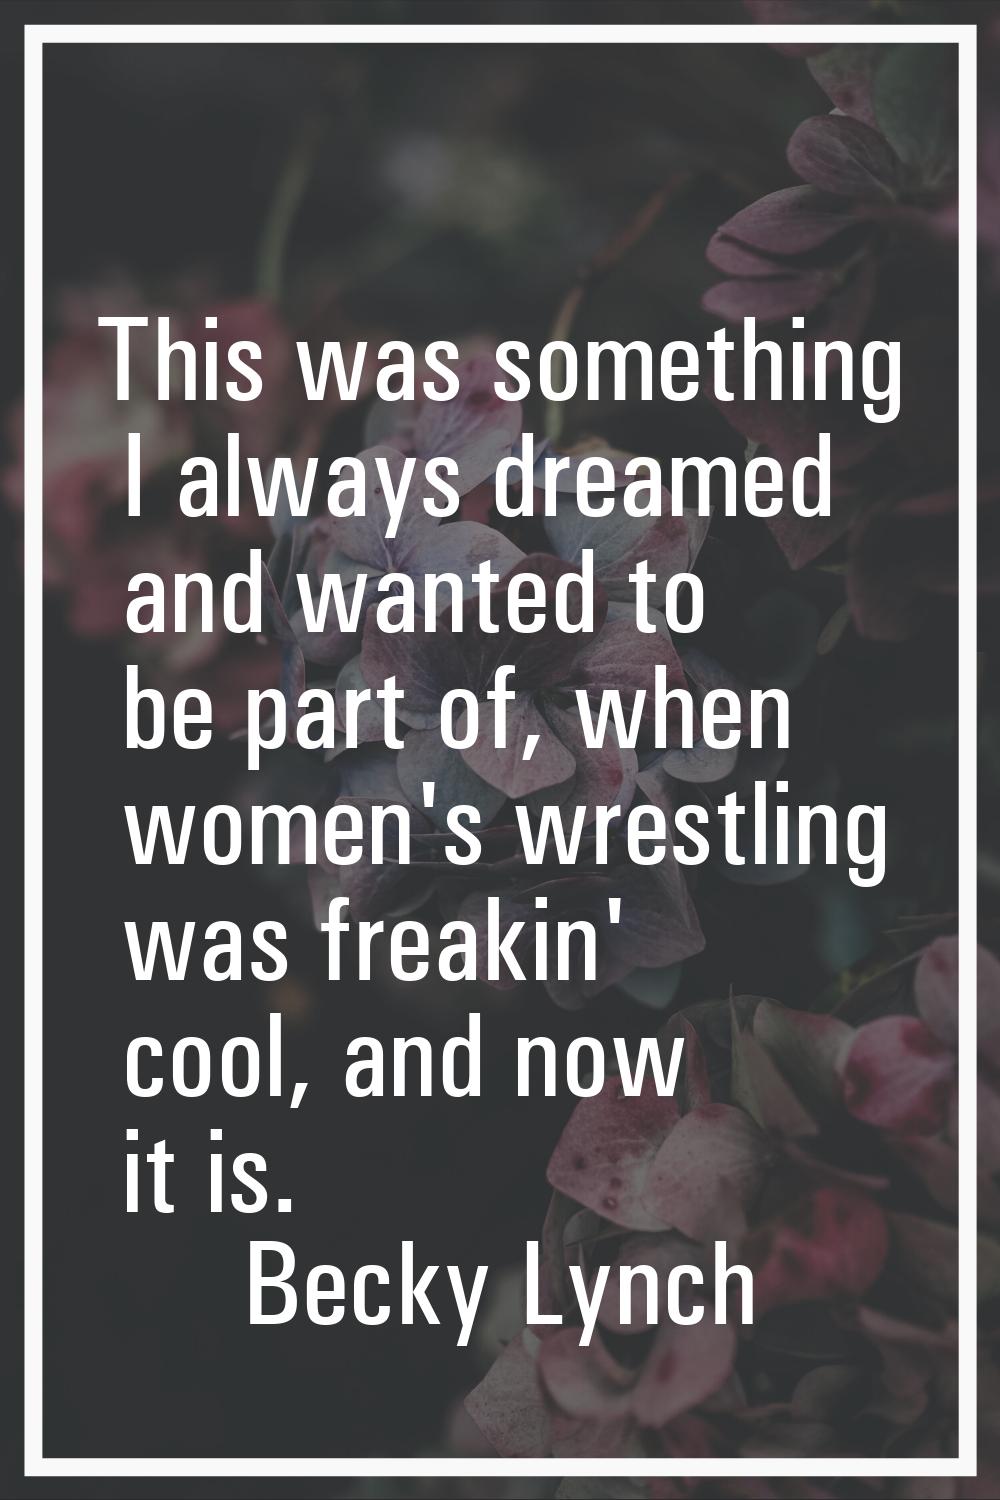 This was something I always dreamed and wanted to be part of, when women's wrestling was freakin' c